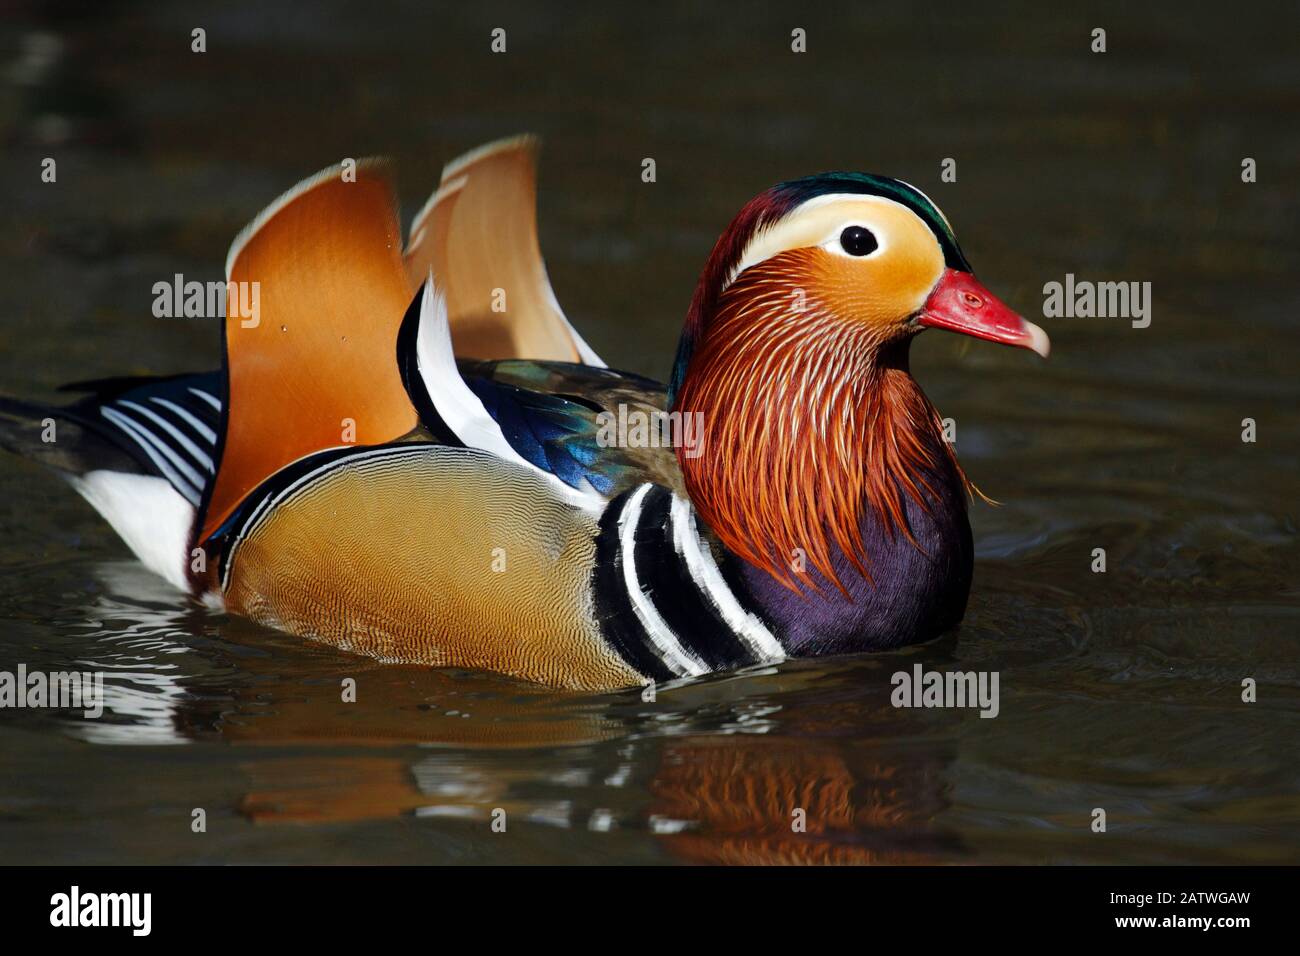 Mandarin duck drake (Aix galericulata) on the water, showing orange sail feathers which are used when displaying, Southwest London, UK, March. Stock Photo